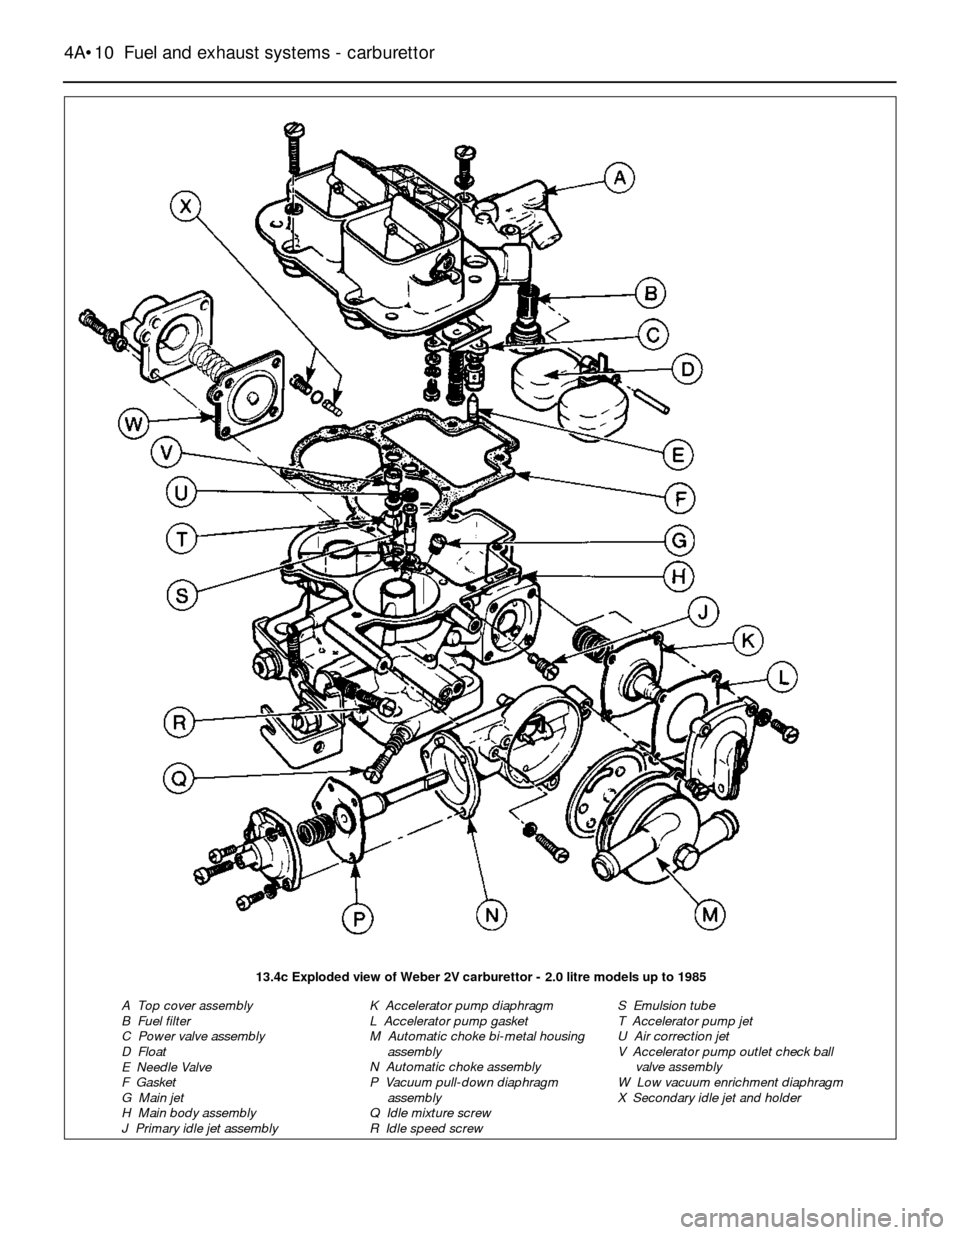 FORD SIERRA 1985 1.G Fuel And Exhaust Systems Carburettor Workshop Manual 4A•10Fuel and exhaust systems - carburettor
13.4c Exploded view of Weber 2V carburettor - 2.0 litre models up to 1985
A  Top cover assembly
B  Fuel filter
C  Power valve assembly
D  Float
E  Needle 